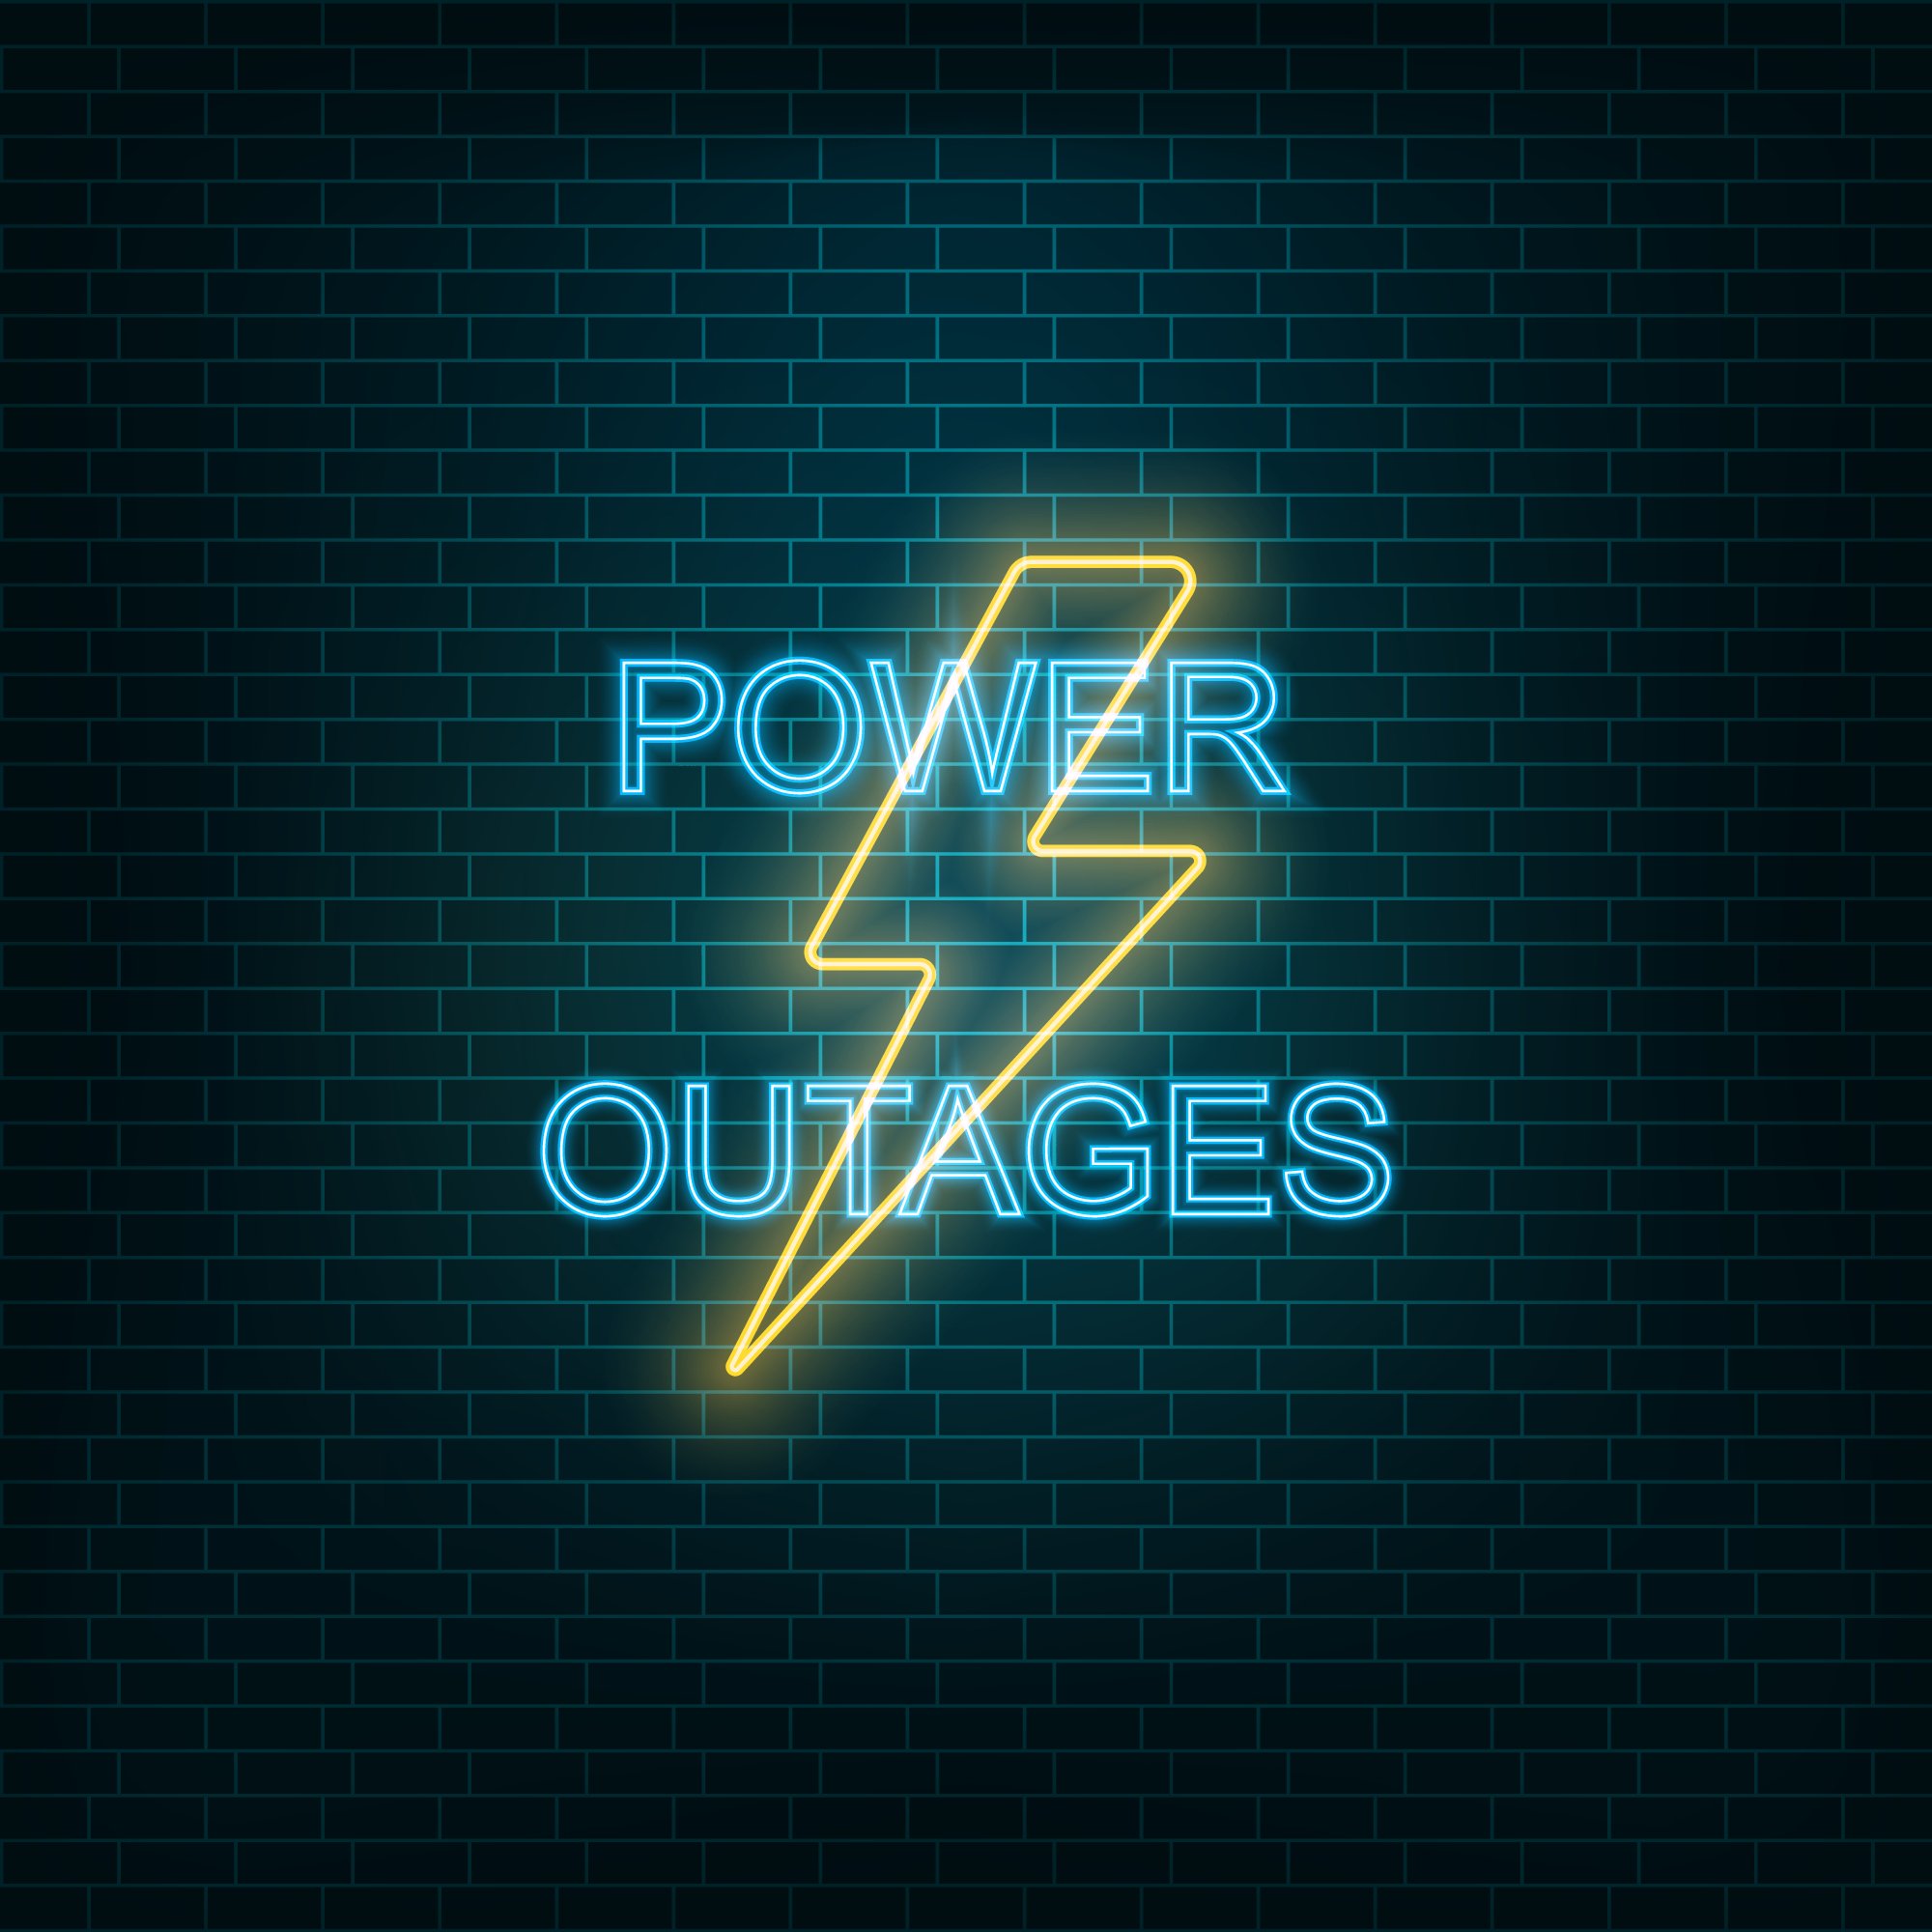 What To Do When The Power Goes Out? [Blackouts & Brownouts]